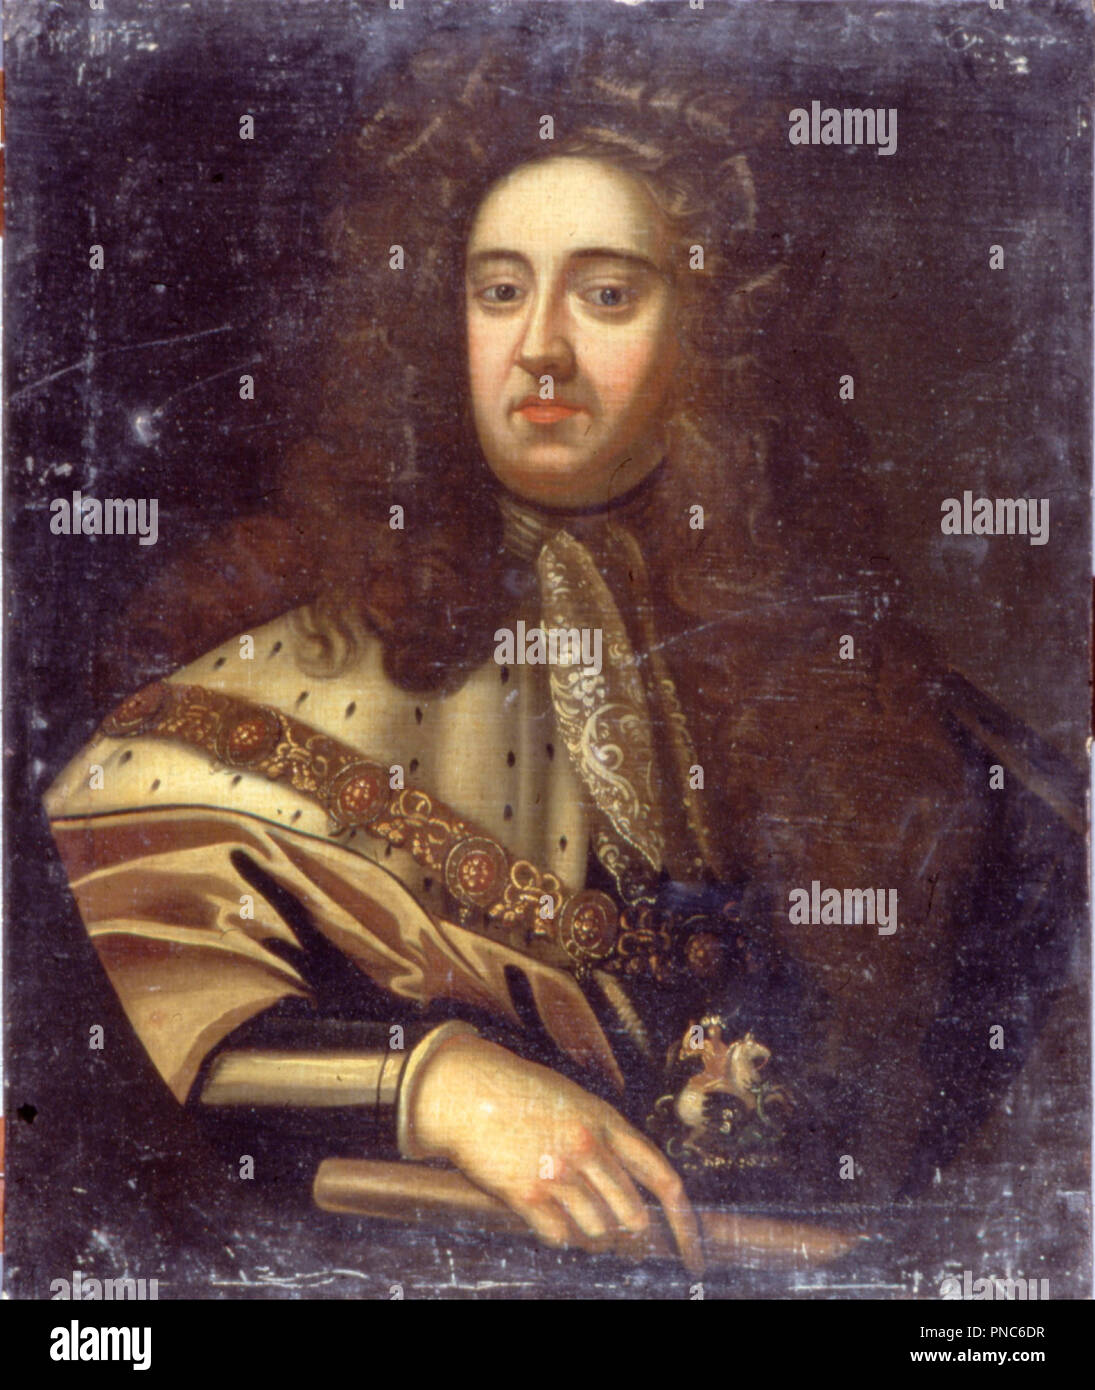 John Churchill, 1st Duke of Marlborough. Date/Period: Early 18th century. Painting. Oil on canvas Oil. Height: 755 mm (29.72 in); Width: 631 mm (24.84 in). Author: British School. Stock Photo